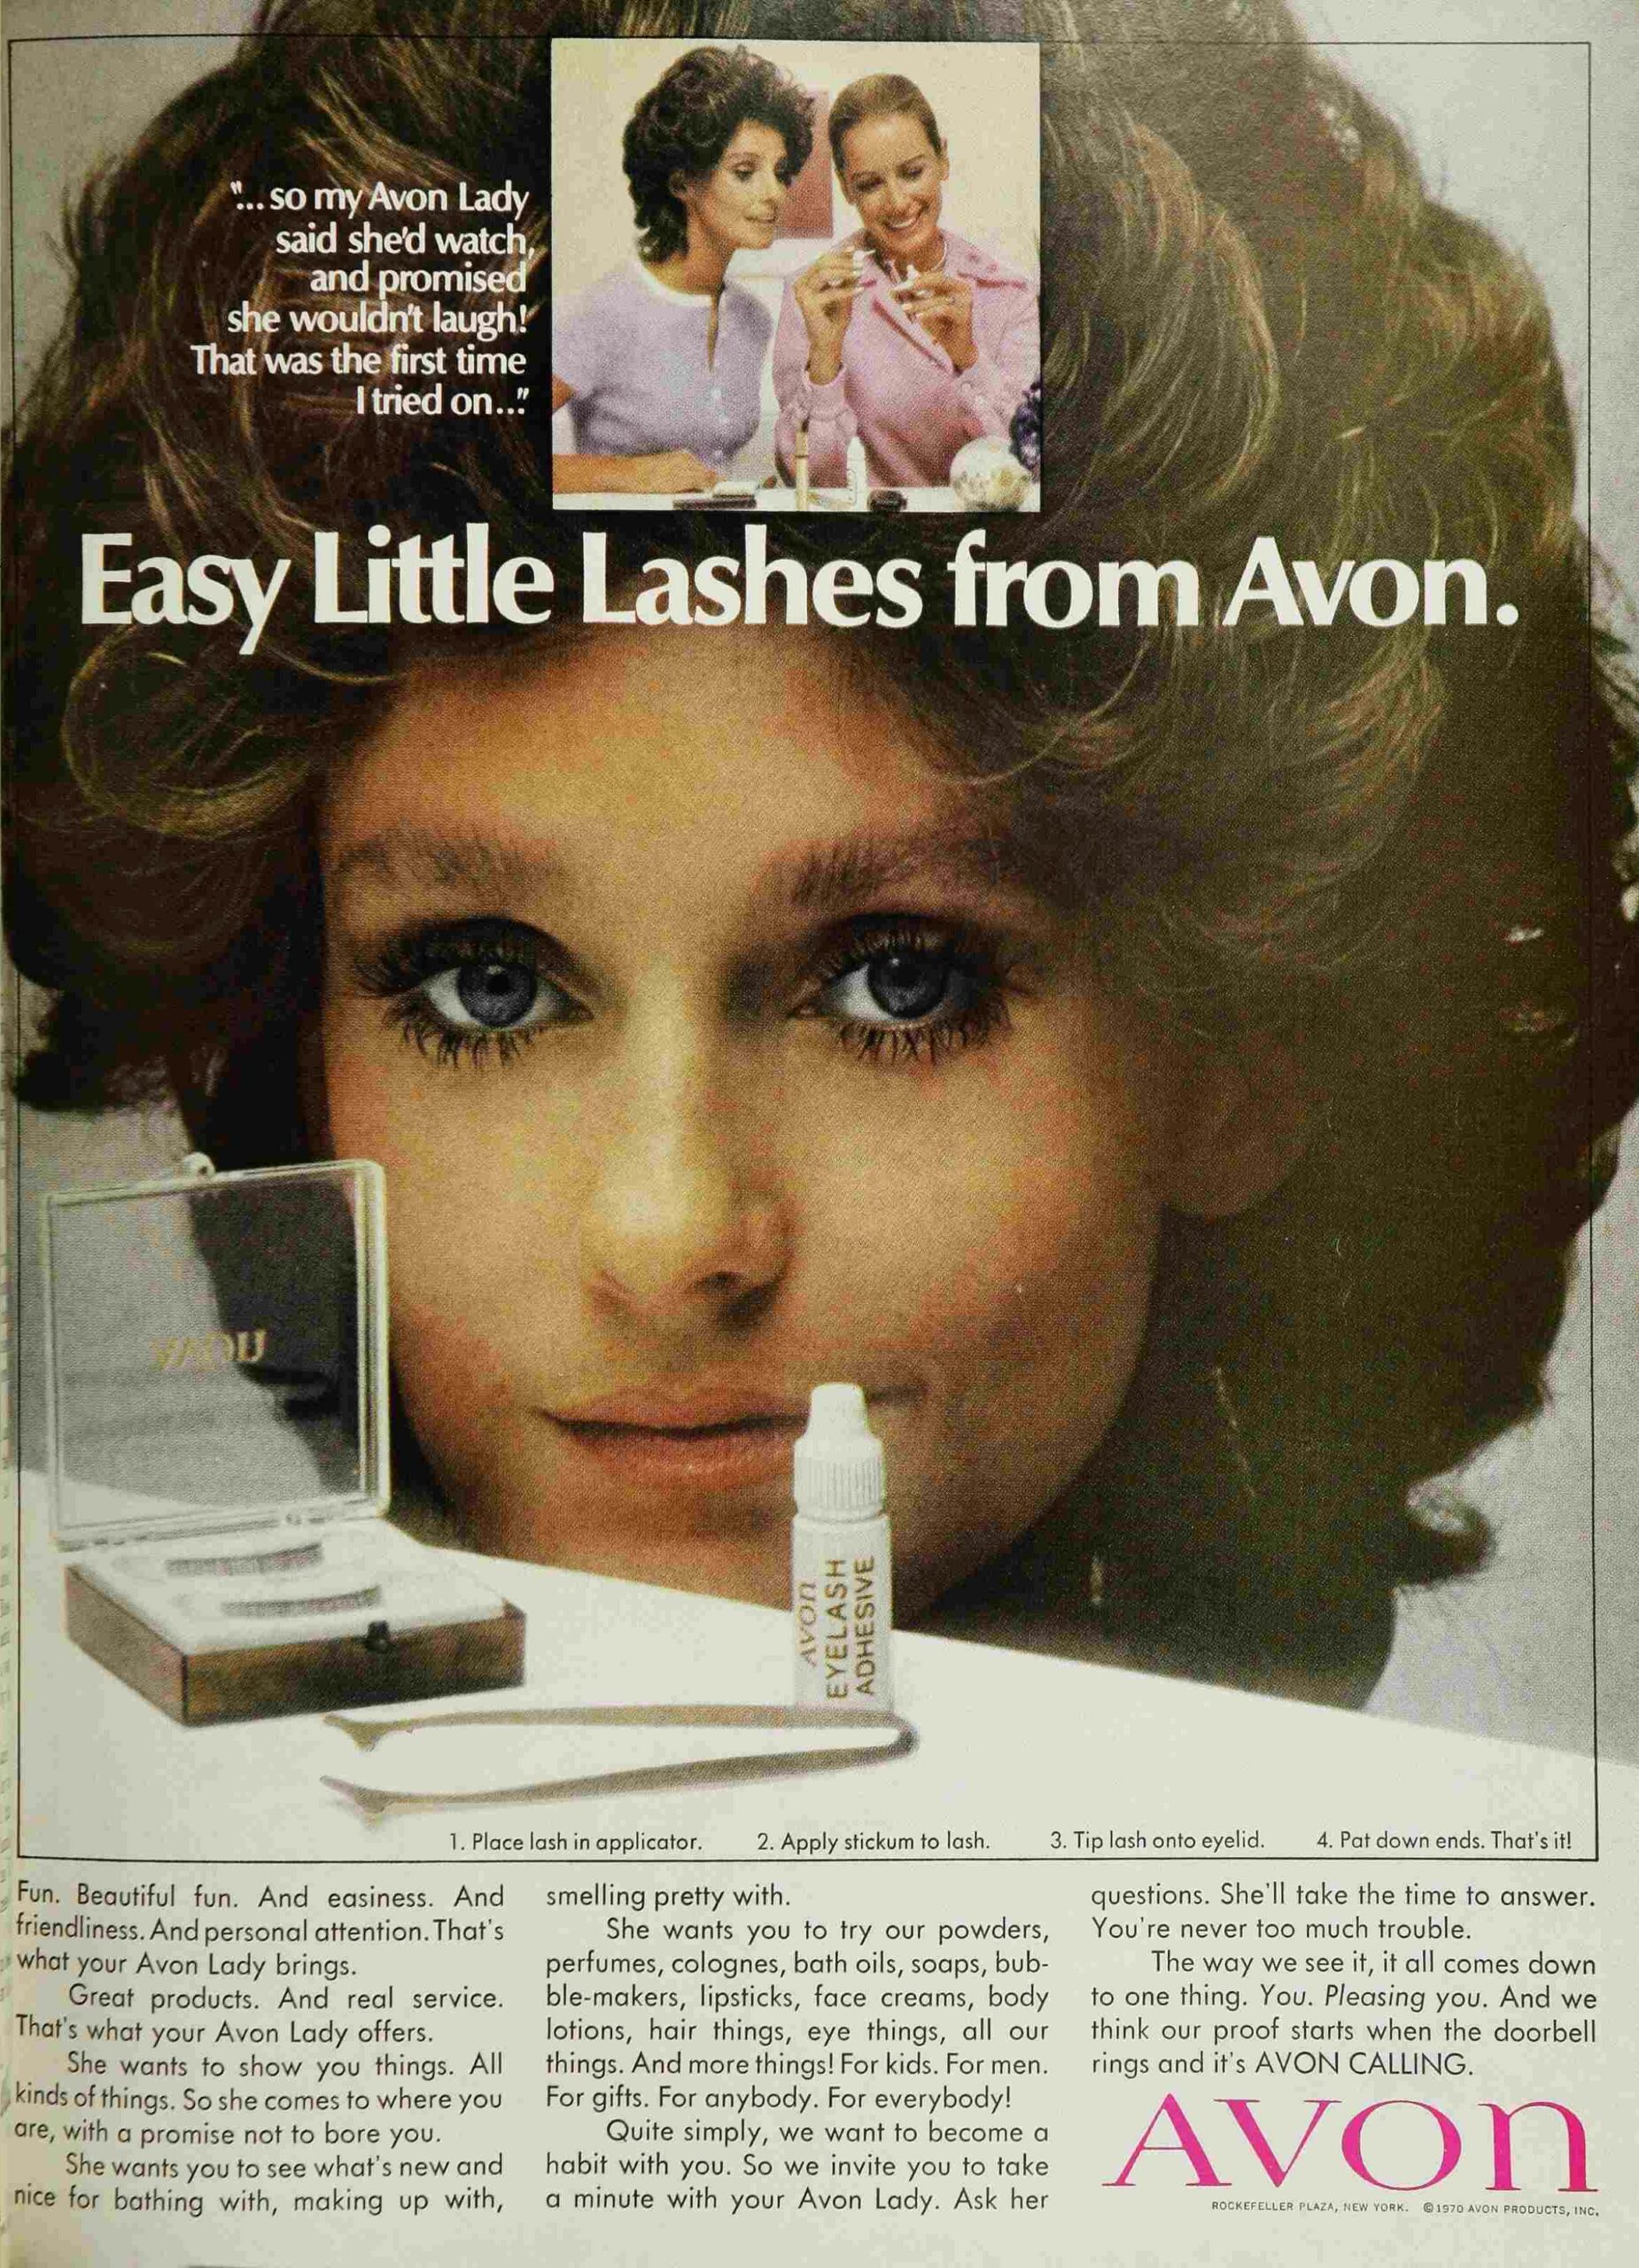 Easy little lashes from Avon.